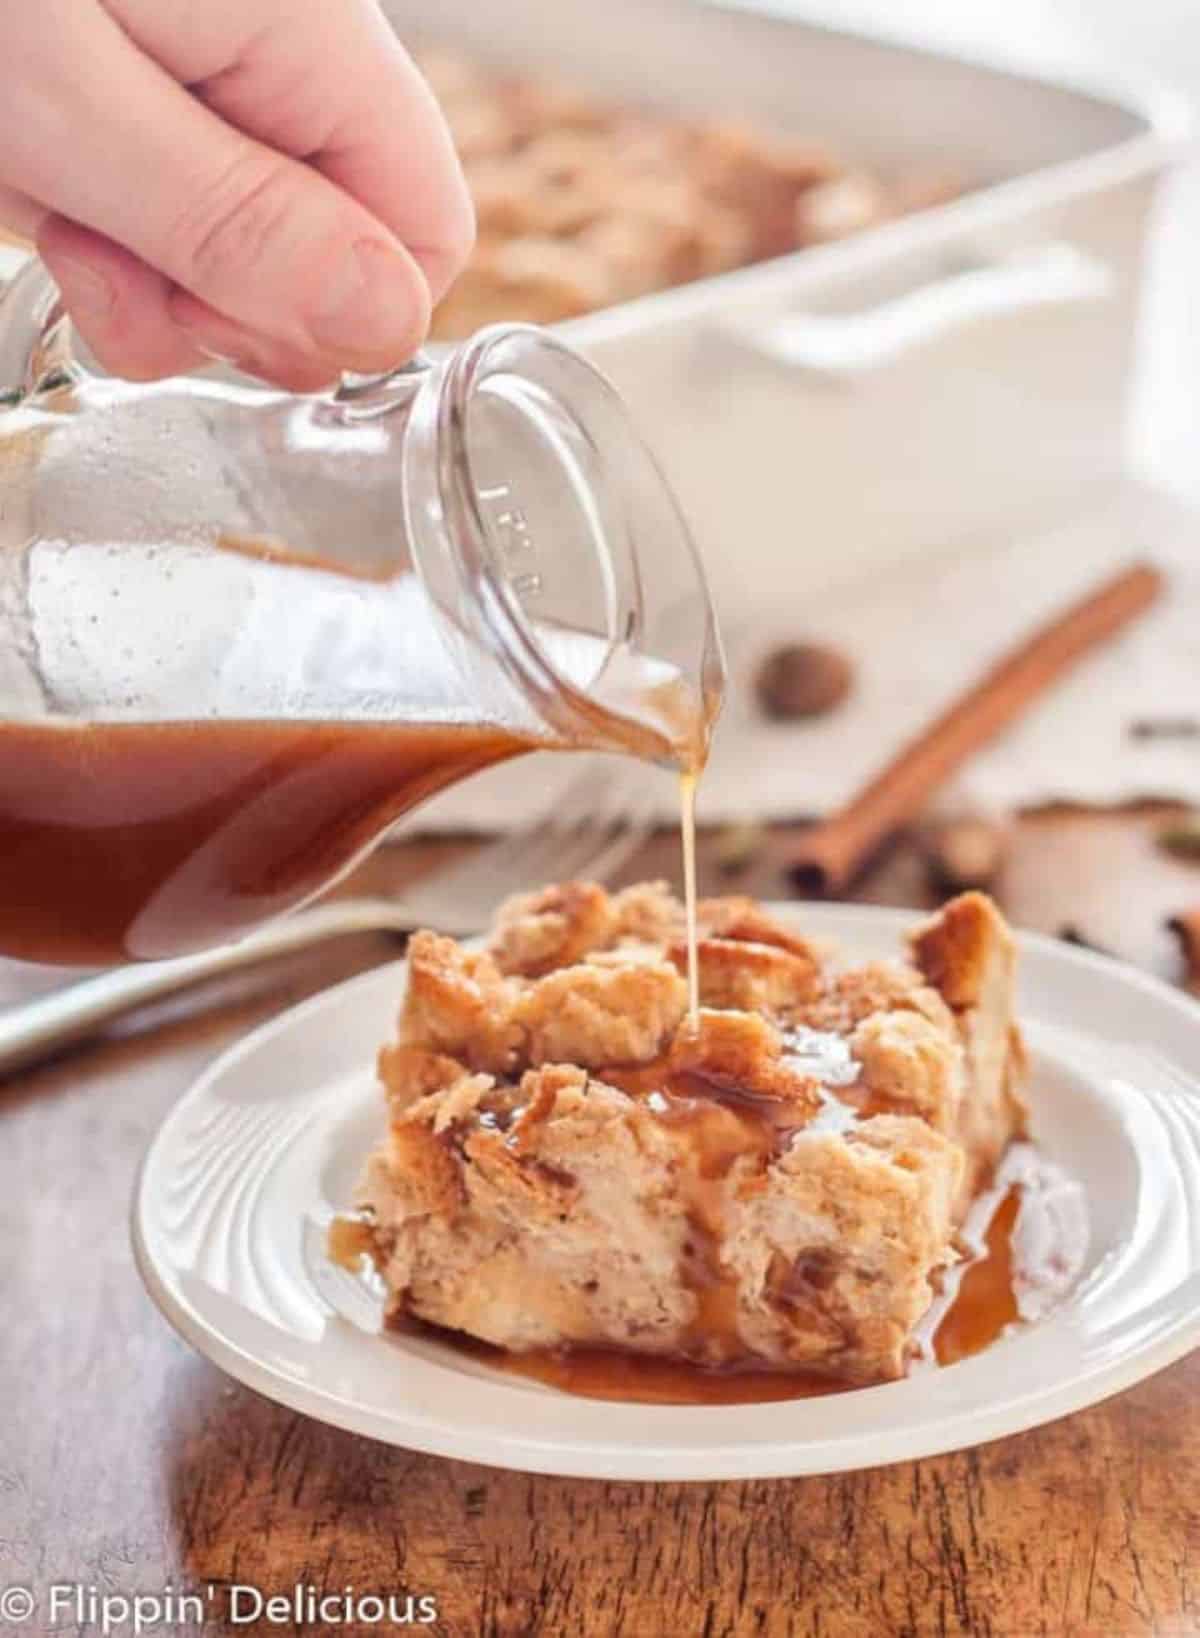 A piece of Gluten-Free Chai French Toast is poured with syrup on a white plate.